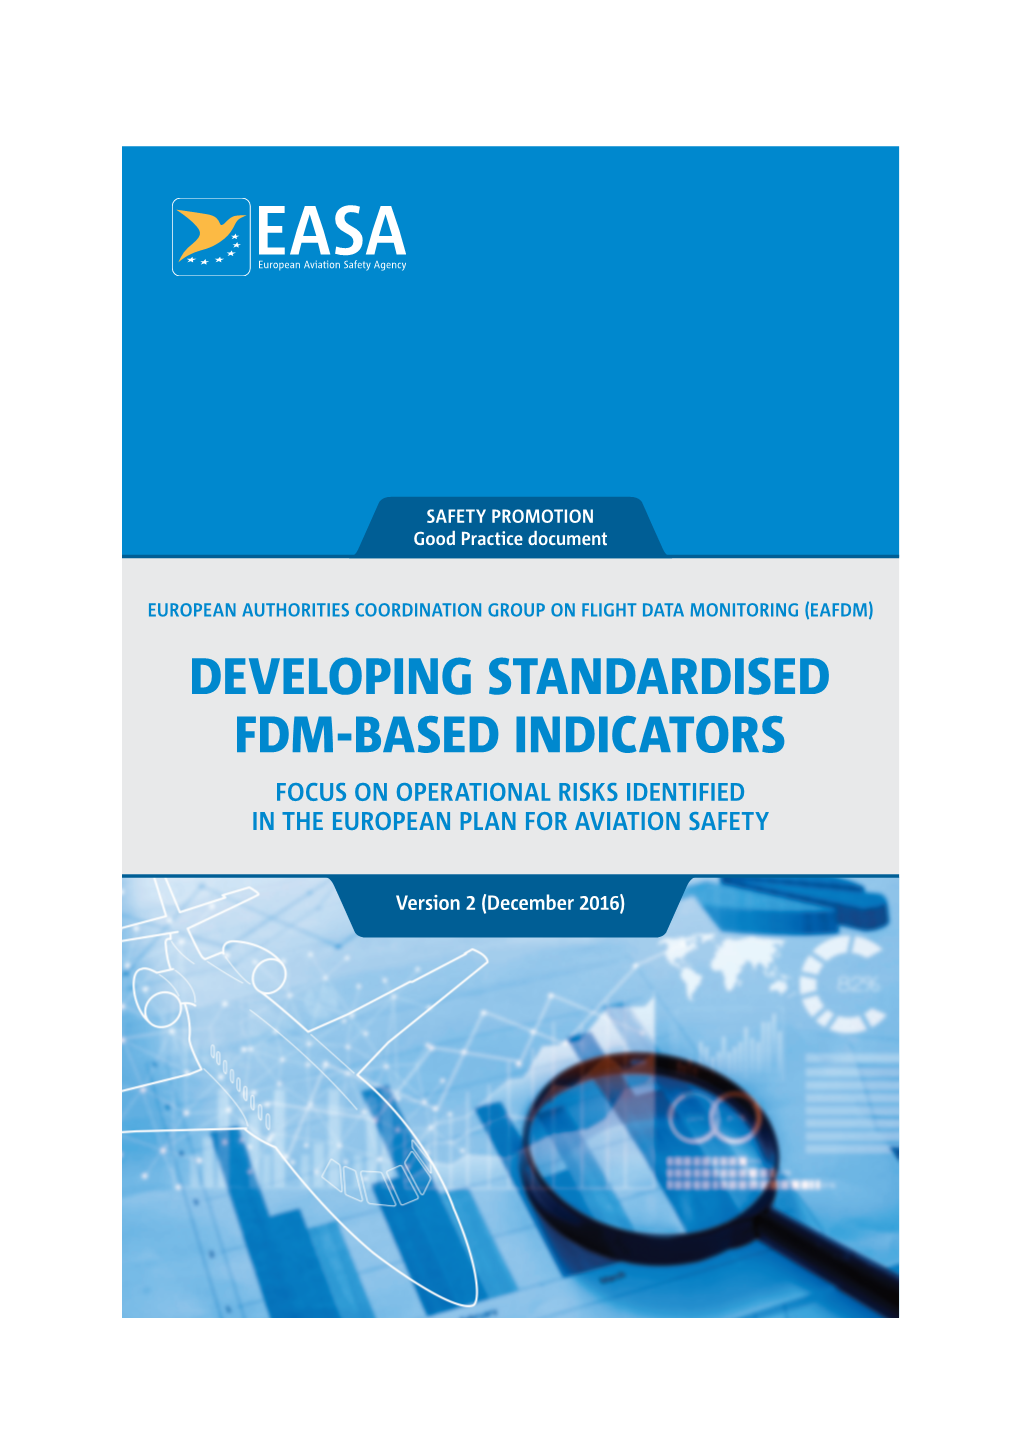 Developing Standardised Fdm-Based Indicators Focus on Operational Risks Identified in the European Plan for Aviation Safety